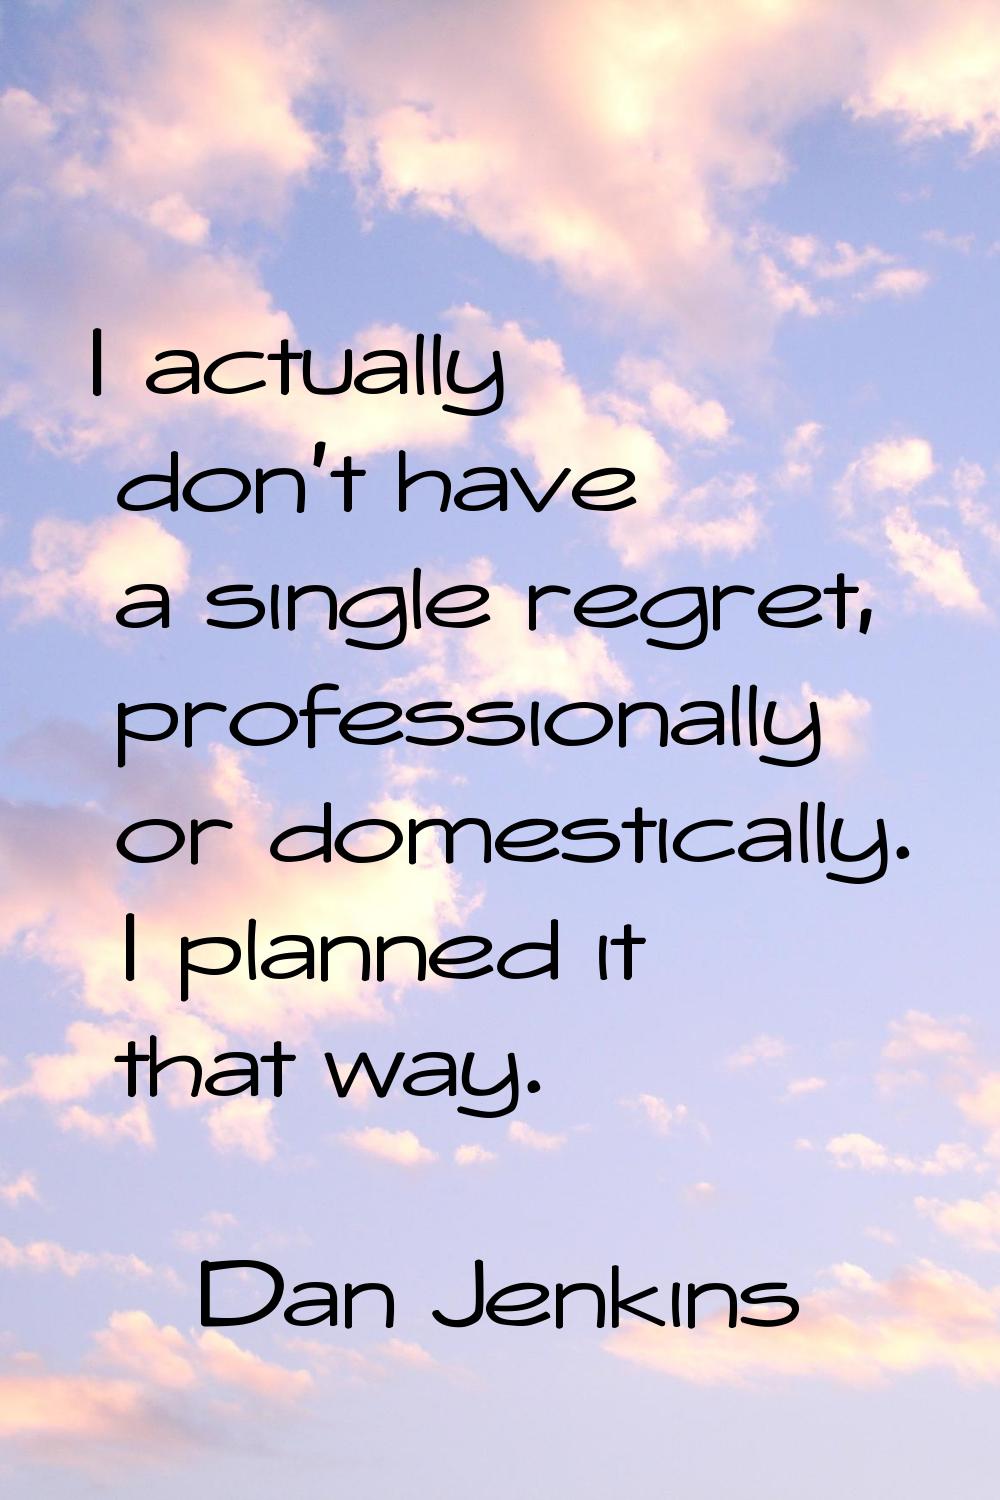 I actually don't have a single regret, professionally or domestically. I planned it that way.